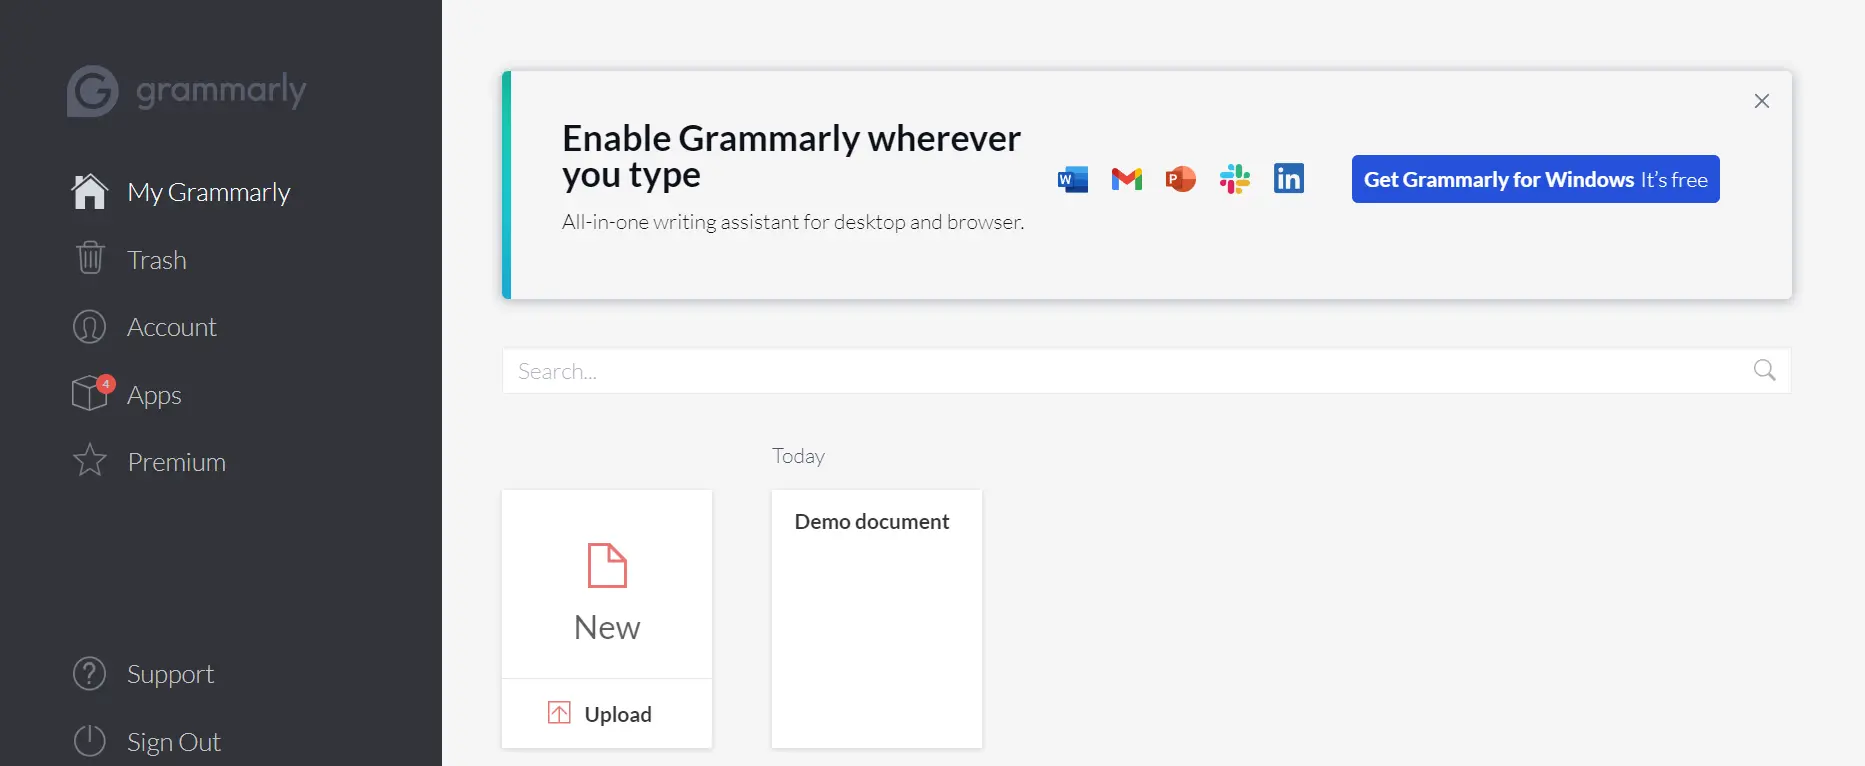 grammarly ai tool for grammar checking for paragraphs